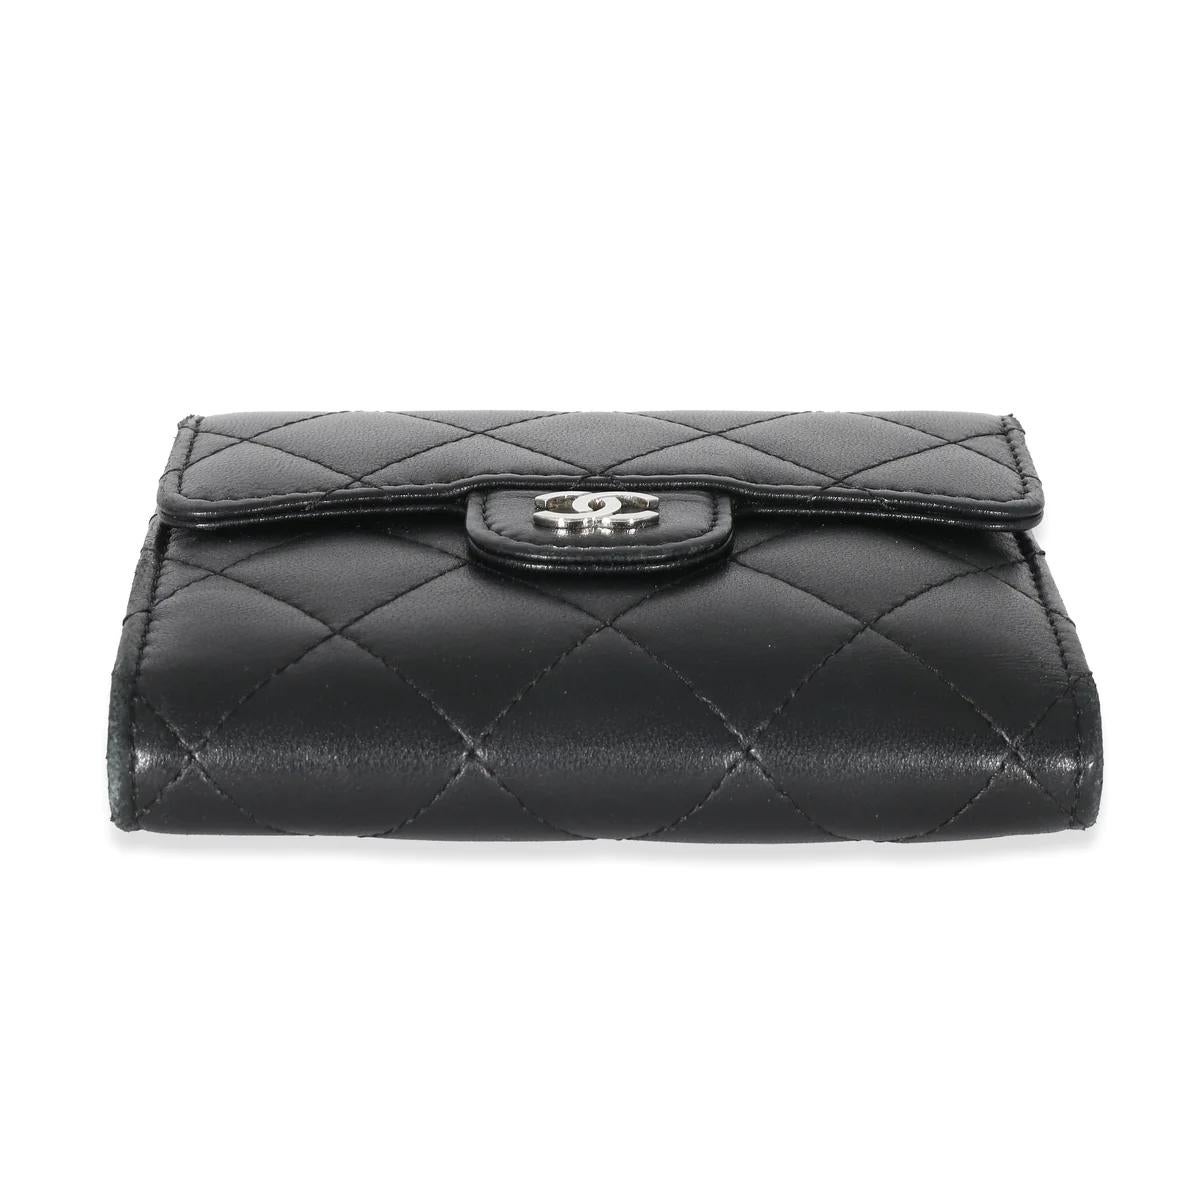 Dimensions: 4.5 X 4.0 X 0.5
Exterior Color: Black
Exterior Material: Quilted
Lambskin
Includes: Dust Bag 
Made In: Italy
Authentic
In very good condition 